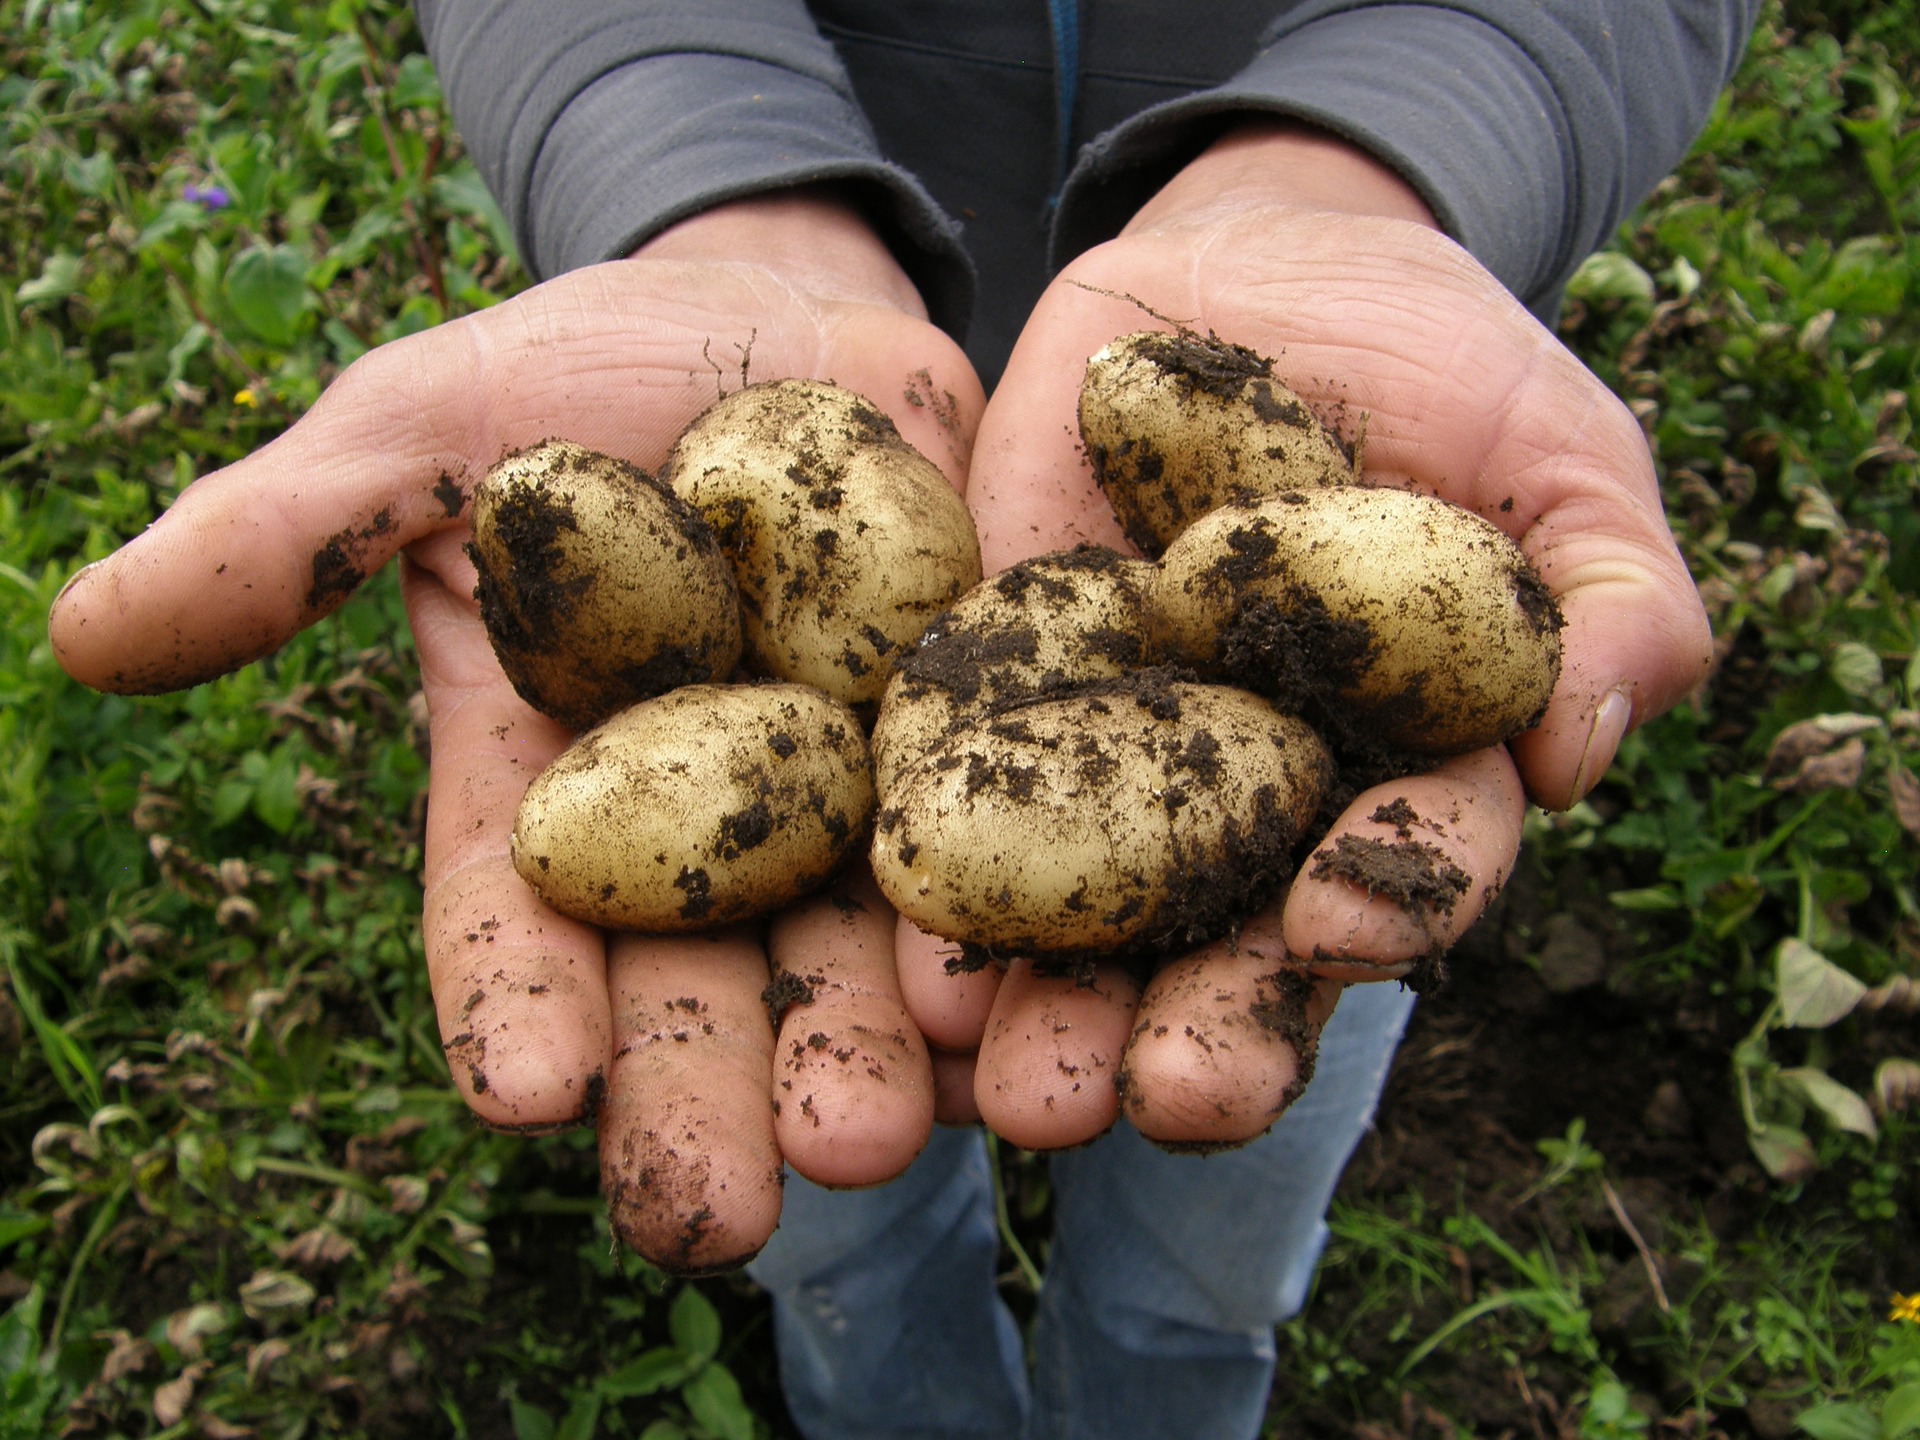 Potatoes in hands still dirty from being harvested